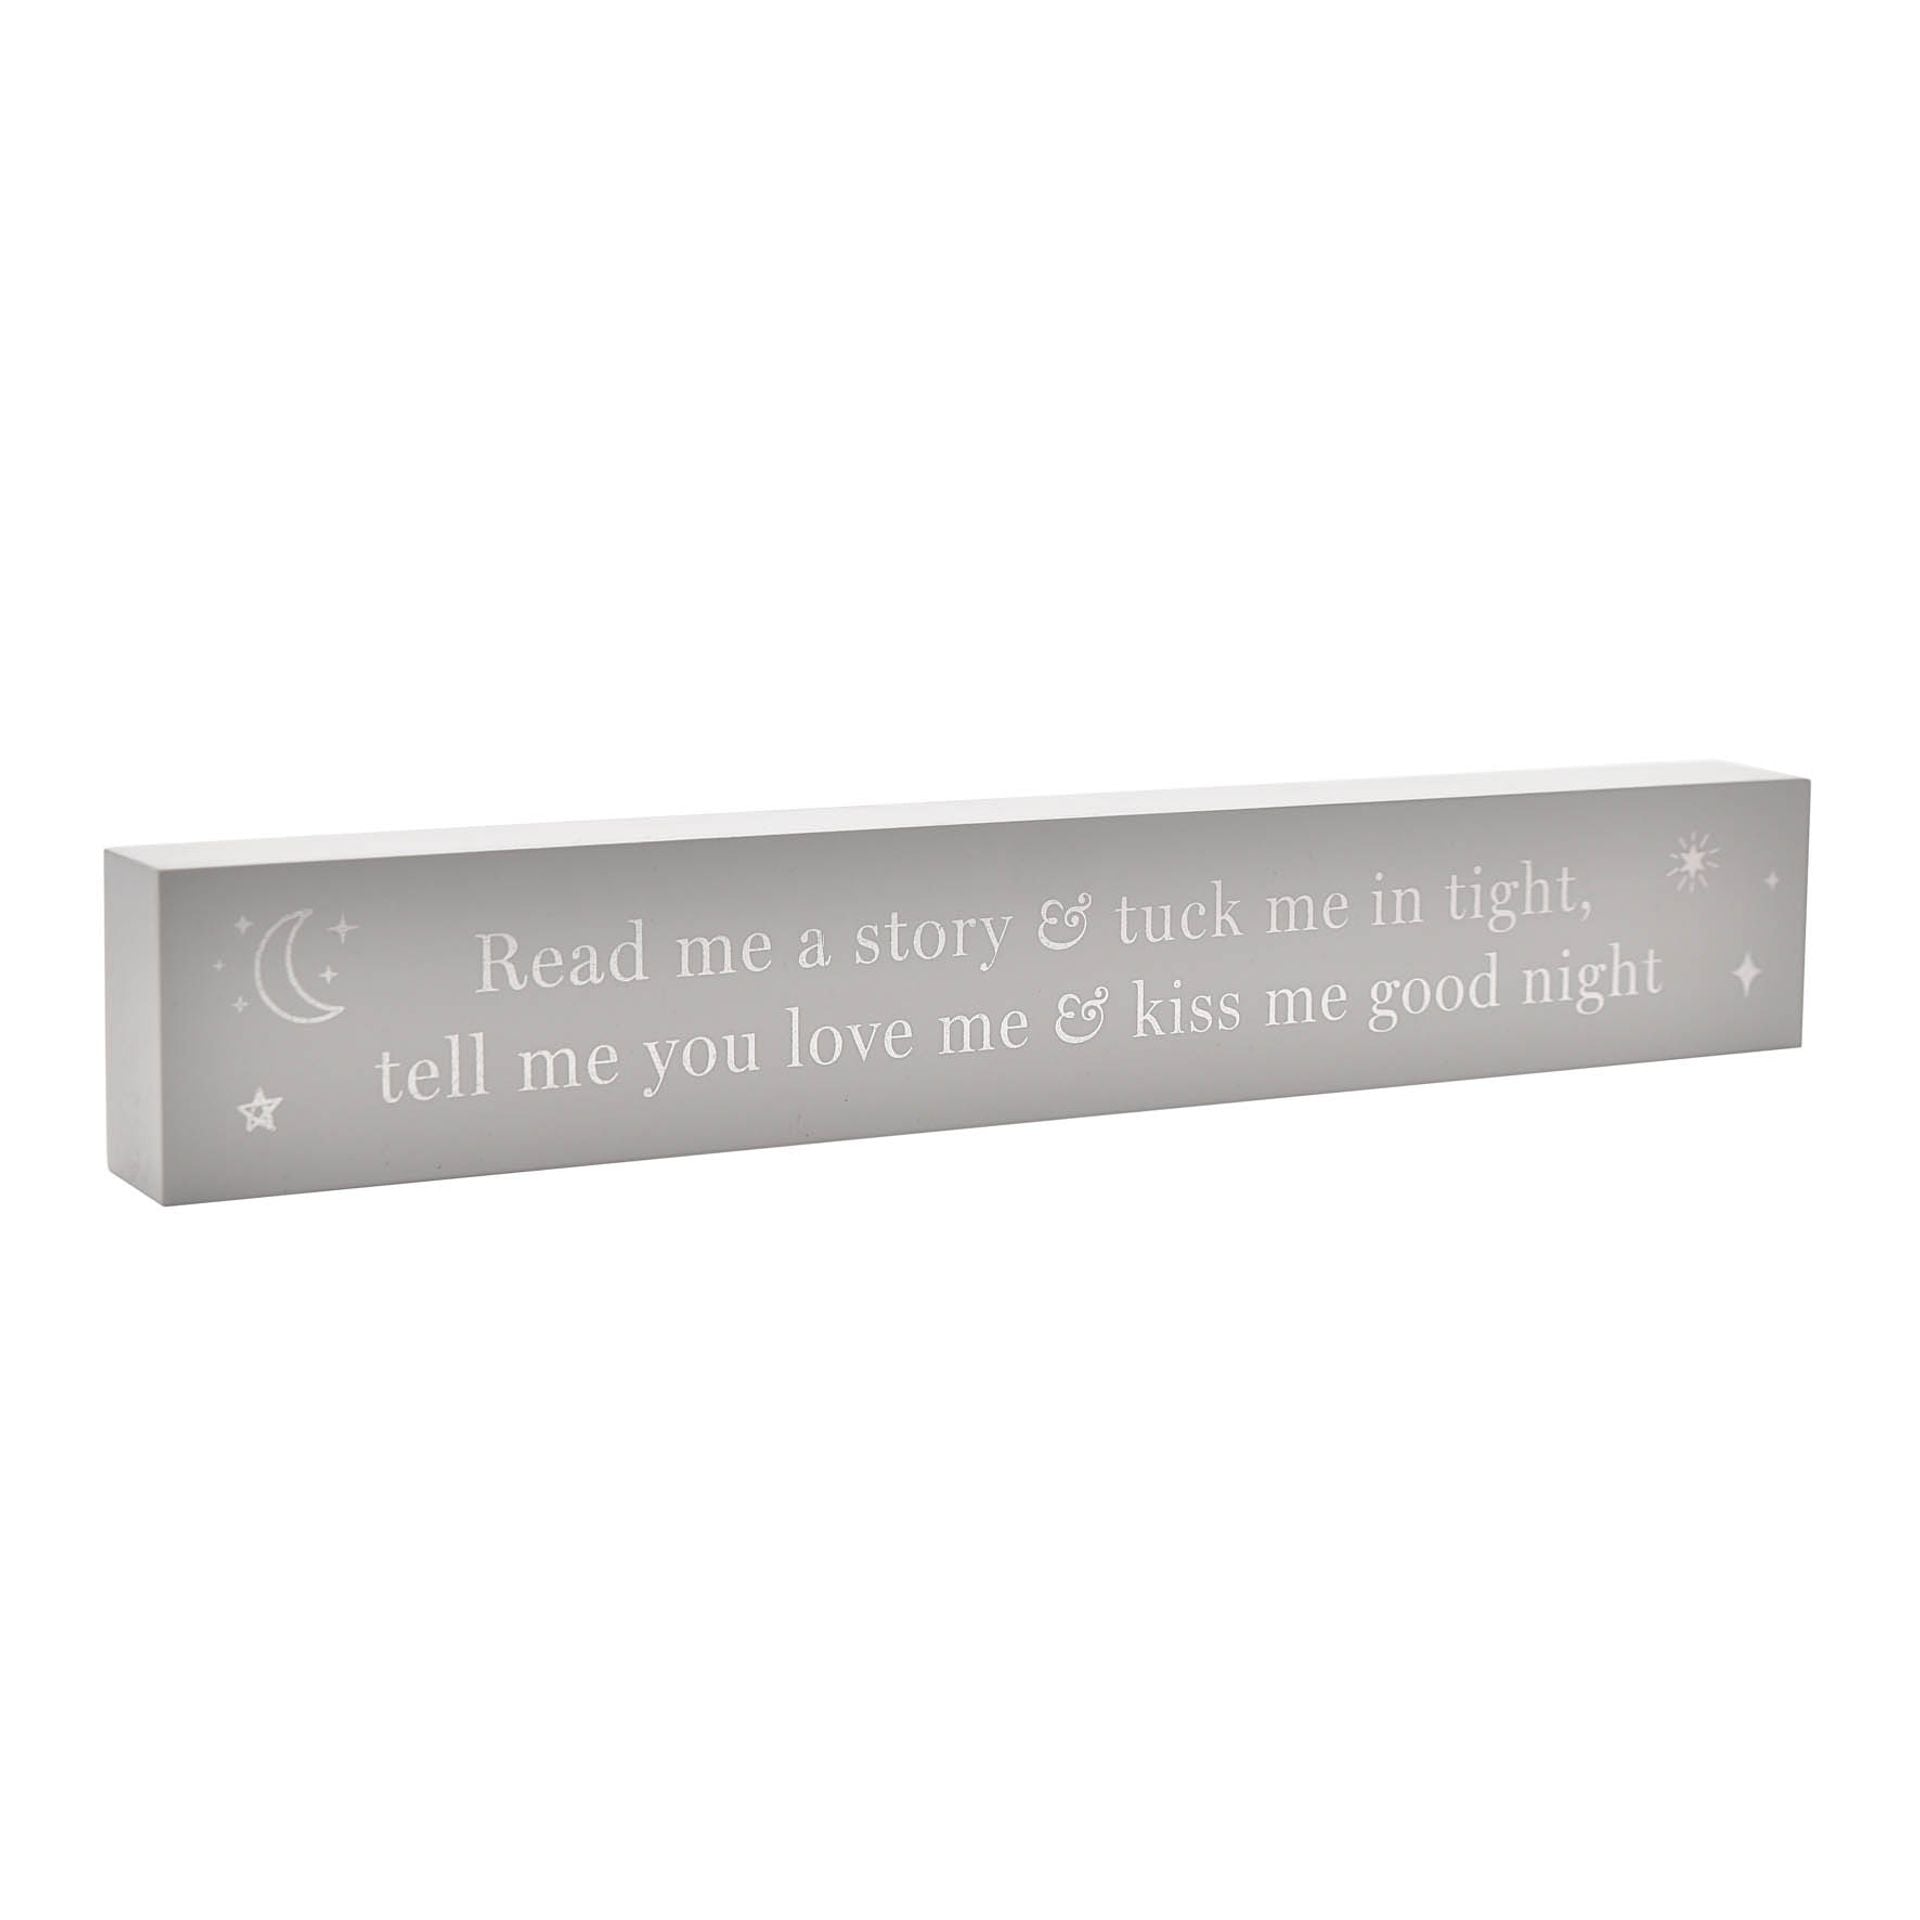 Read Me A Story & Tuck Me In Tight' Wooden Nursery Plaque